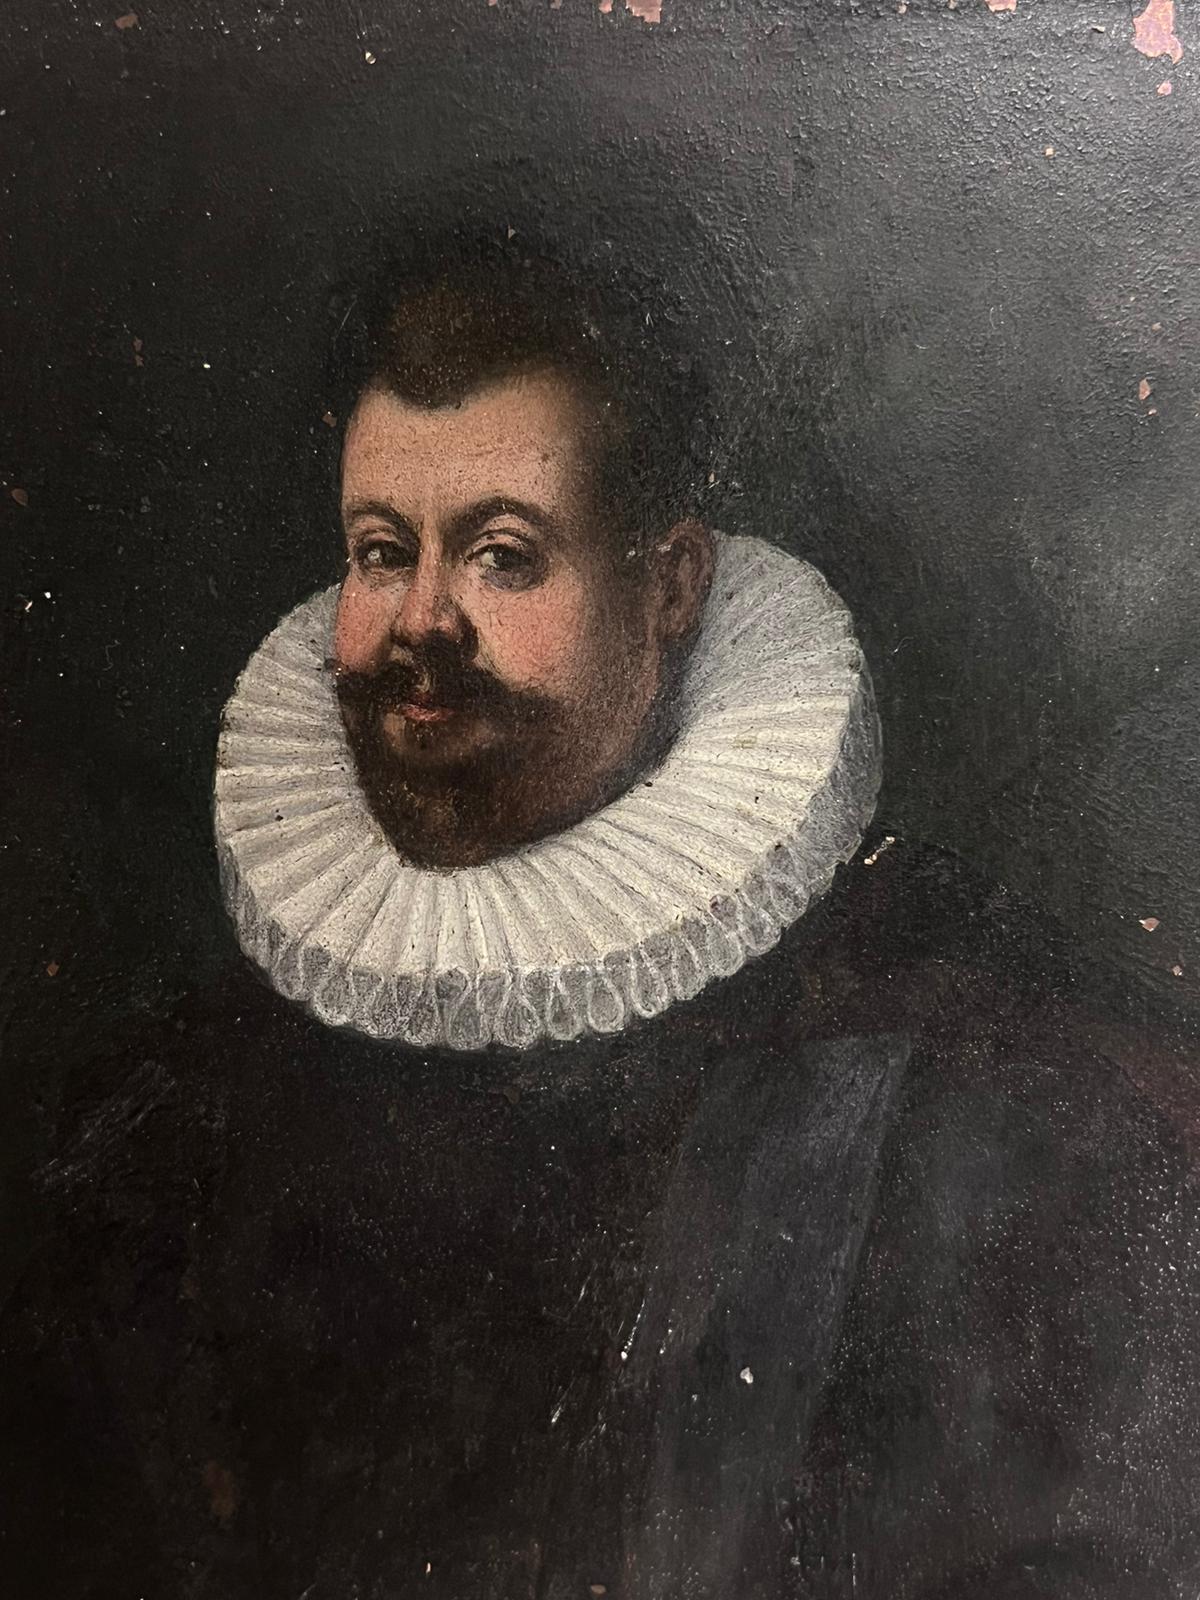 Portrait of a Gentleman wearing a Ruff Collar
Dutch/ French artist, 18th century
oil painting on copper, unframed
copper board : 6.75 x 5 inches
provenance: private collection, UK
condition: good and sound condition, a few small areas of paint loss. 